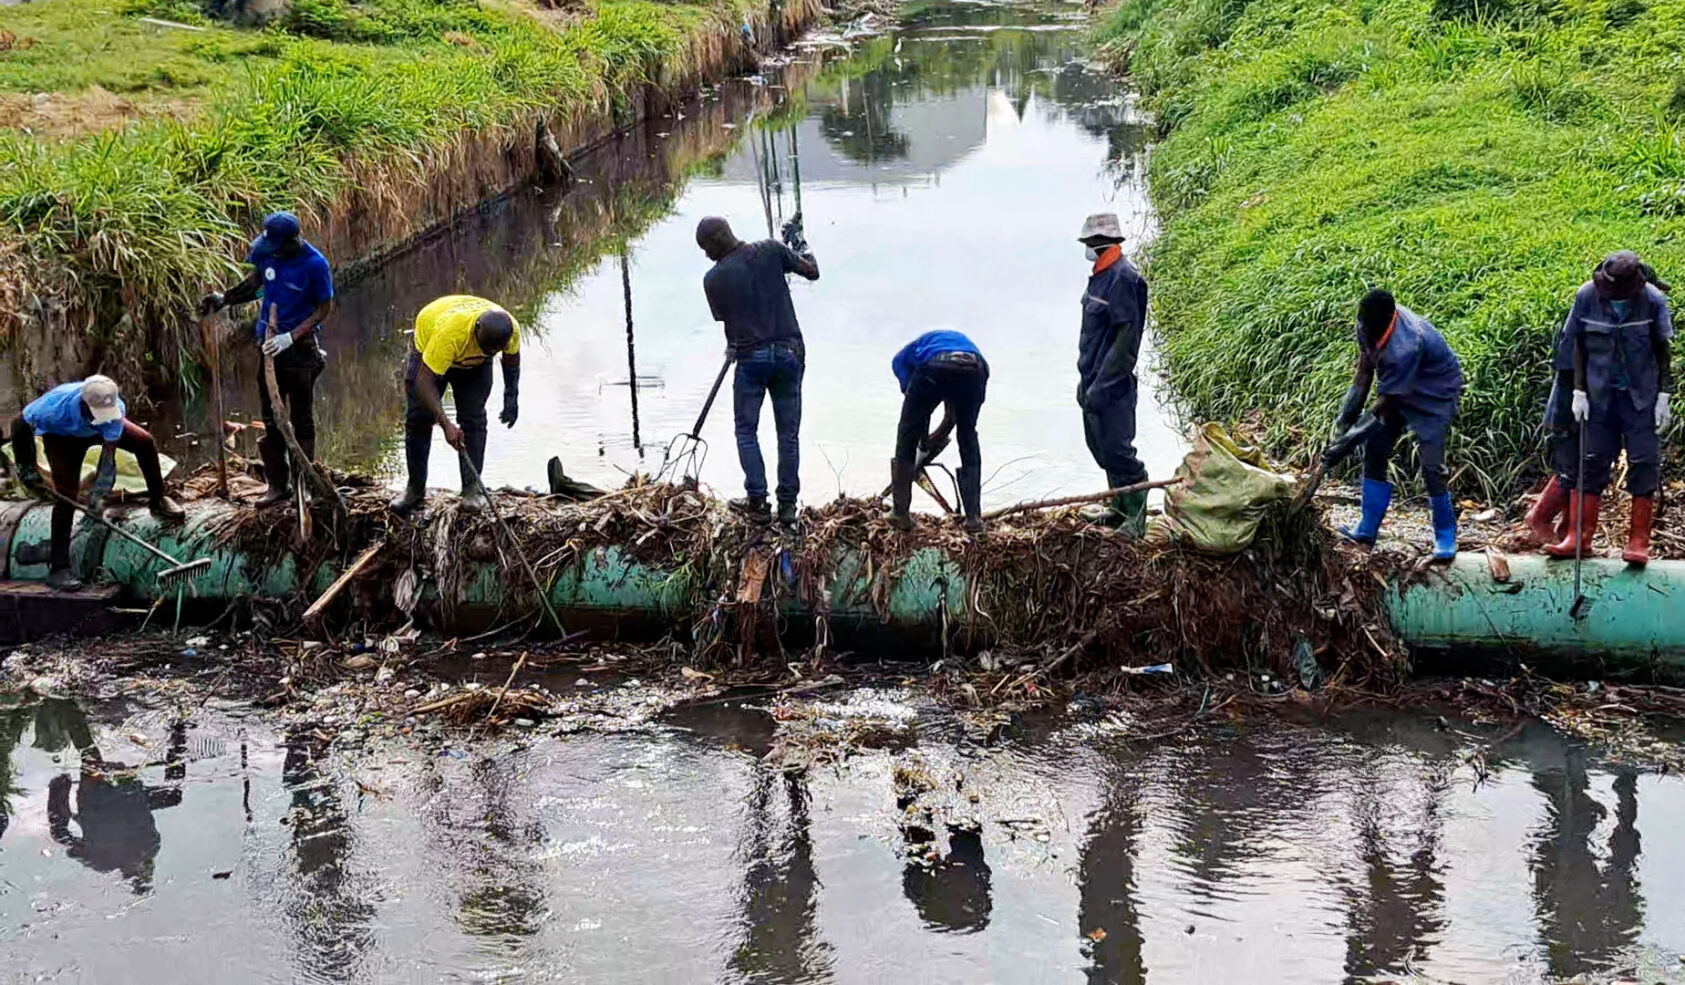 Farhan Khan, NORCE, Plastic clean-up in Tanzania, in the NORCE-led project Clean Shores, Great Lakes. Here we see volunteers in action at the area where the Mirongo River flows into Lake Victoria., Clean shores Great lakes clean up1, , 